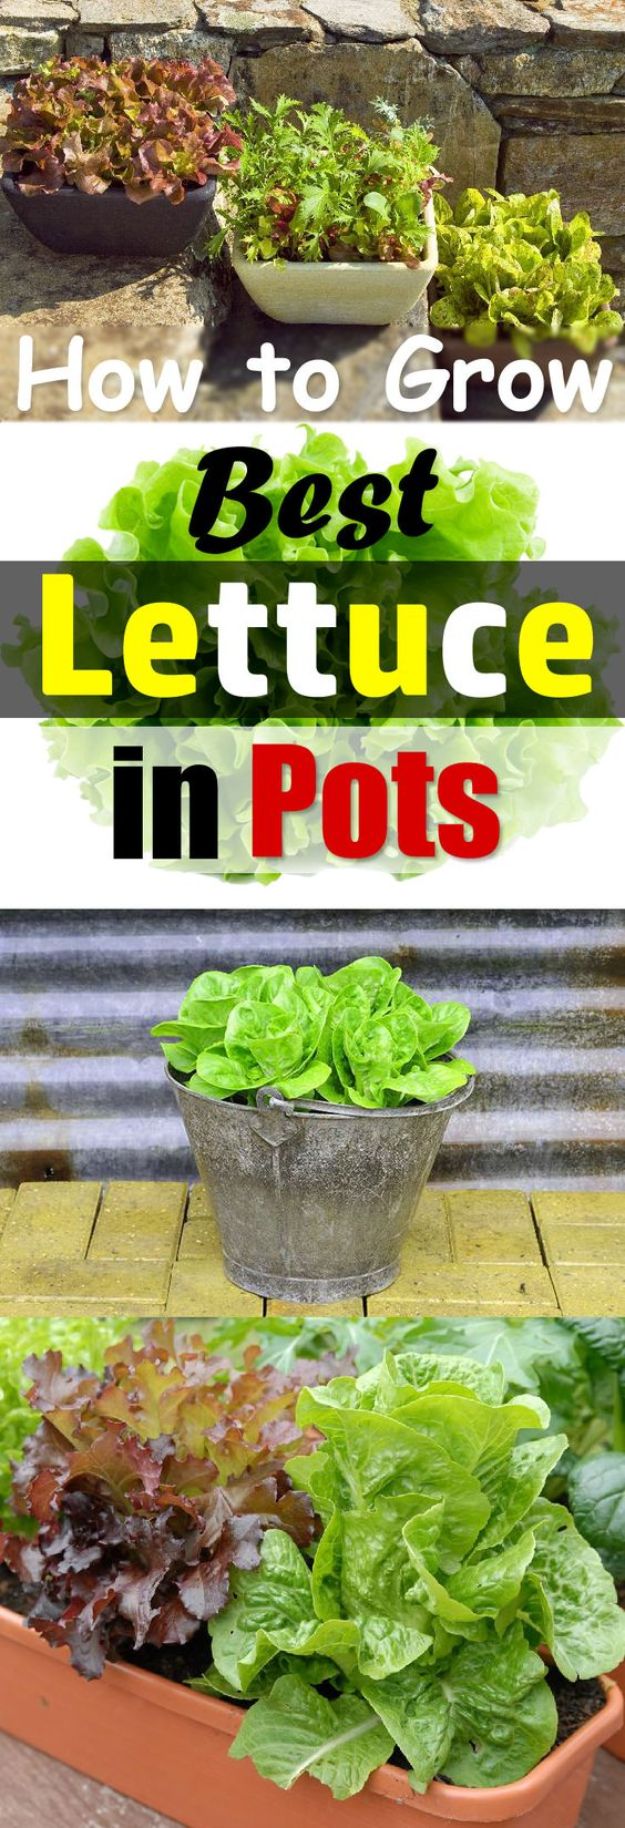 Container Gardening Ideas - Growing Lettuce In Containers - Easy Garden Projects for Containers and Growing Plants in Small Spaces - DIY Potting Tips and Planter Boxes for Vegetables, Herbs and Flowers - Simple Ideas for Beginners -Shade, Full Sun, Pation and Yard Landscape Idea tutorials 